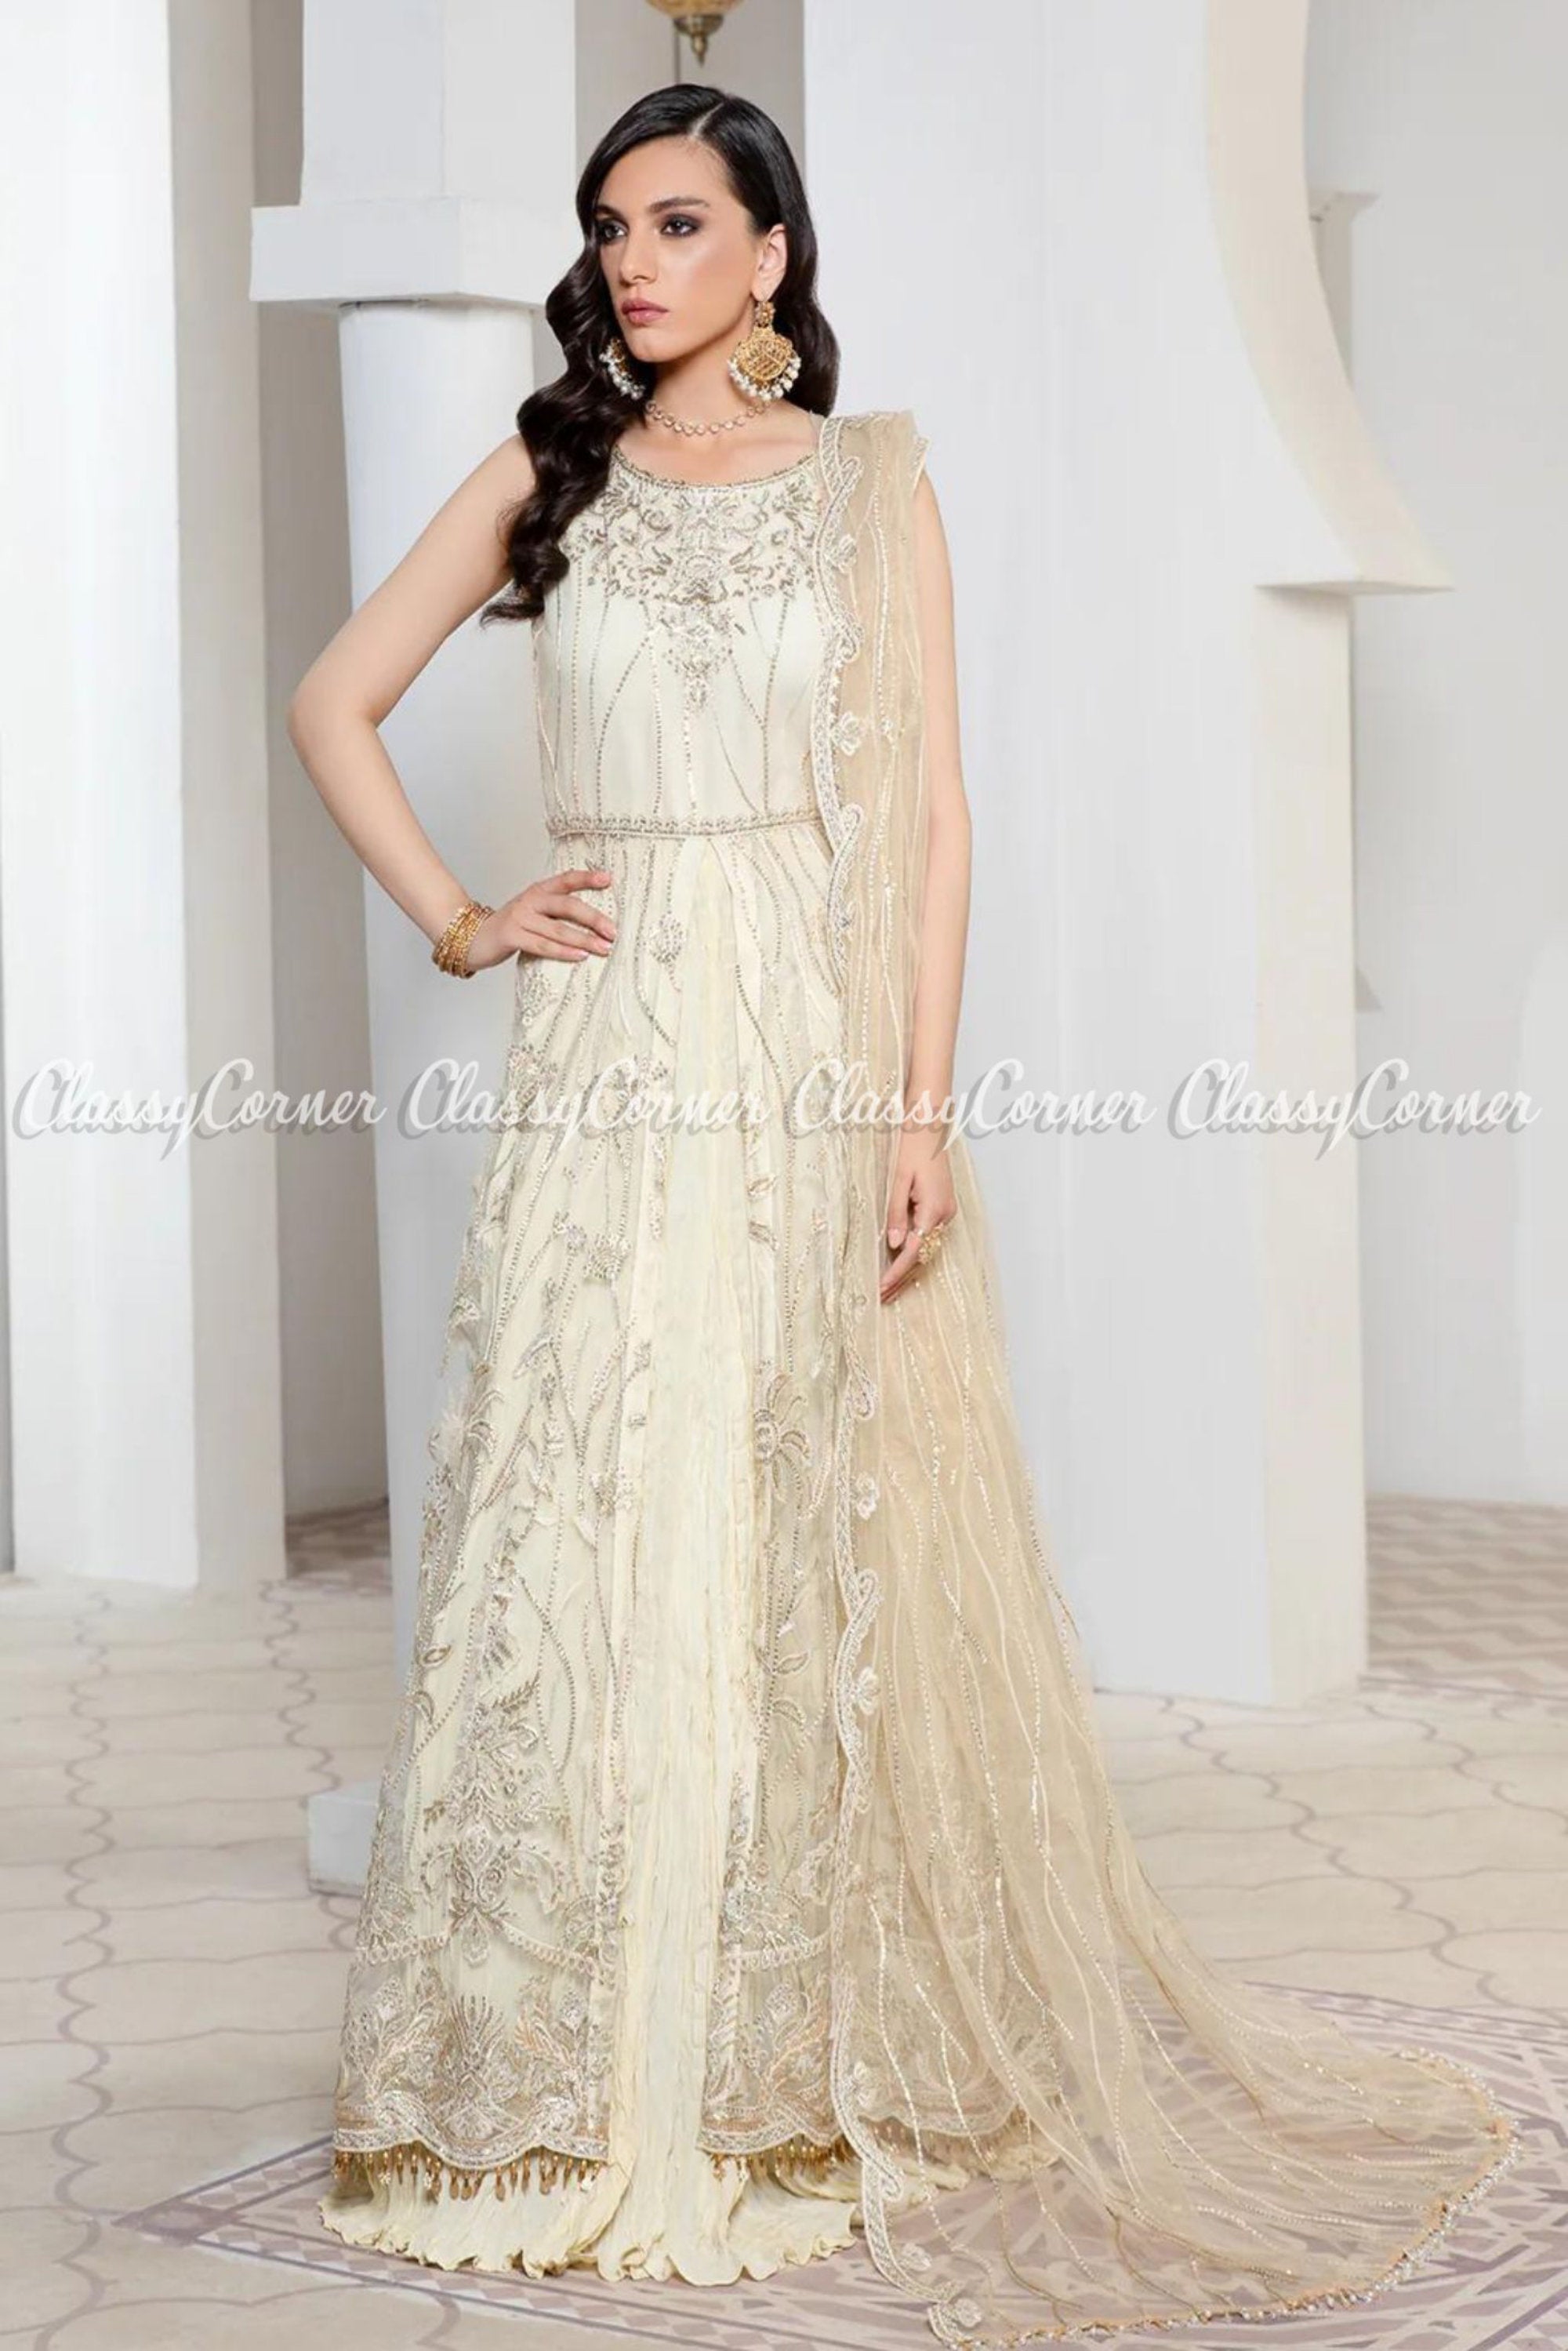 Cream White Beige Net Embroidered Party Wear Gown Outfits - Classy Corner